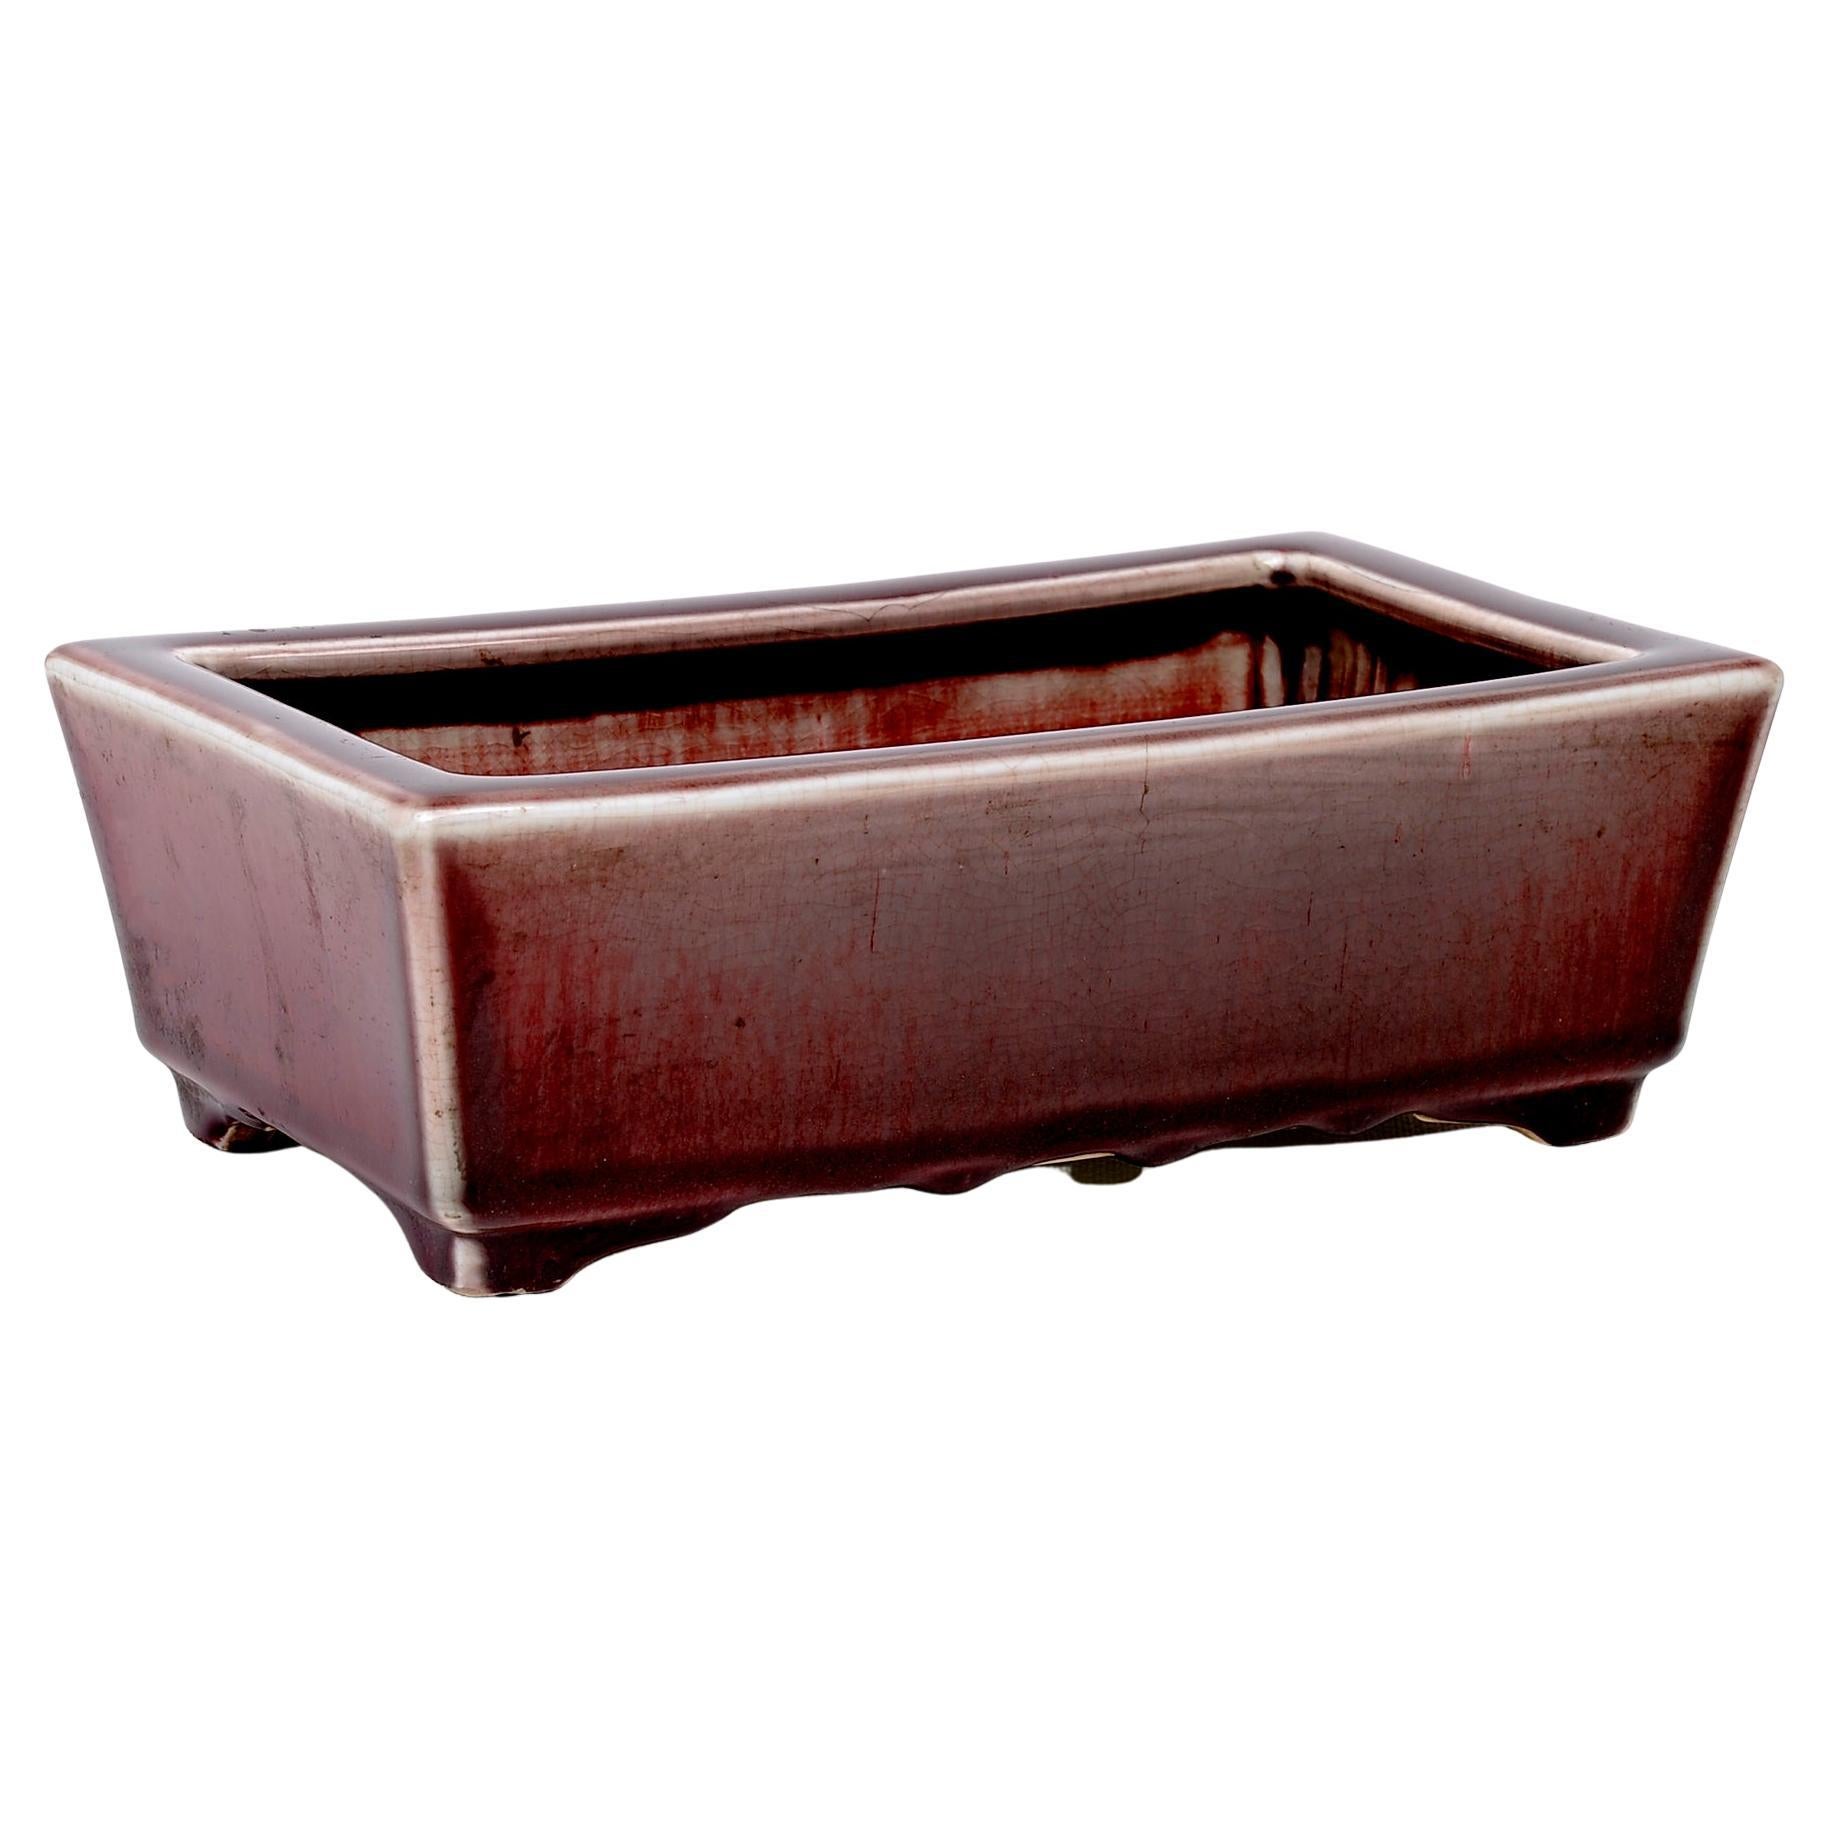 Bonsai Pot in Red Porcelain For Sale